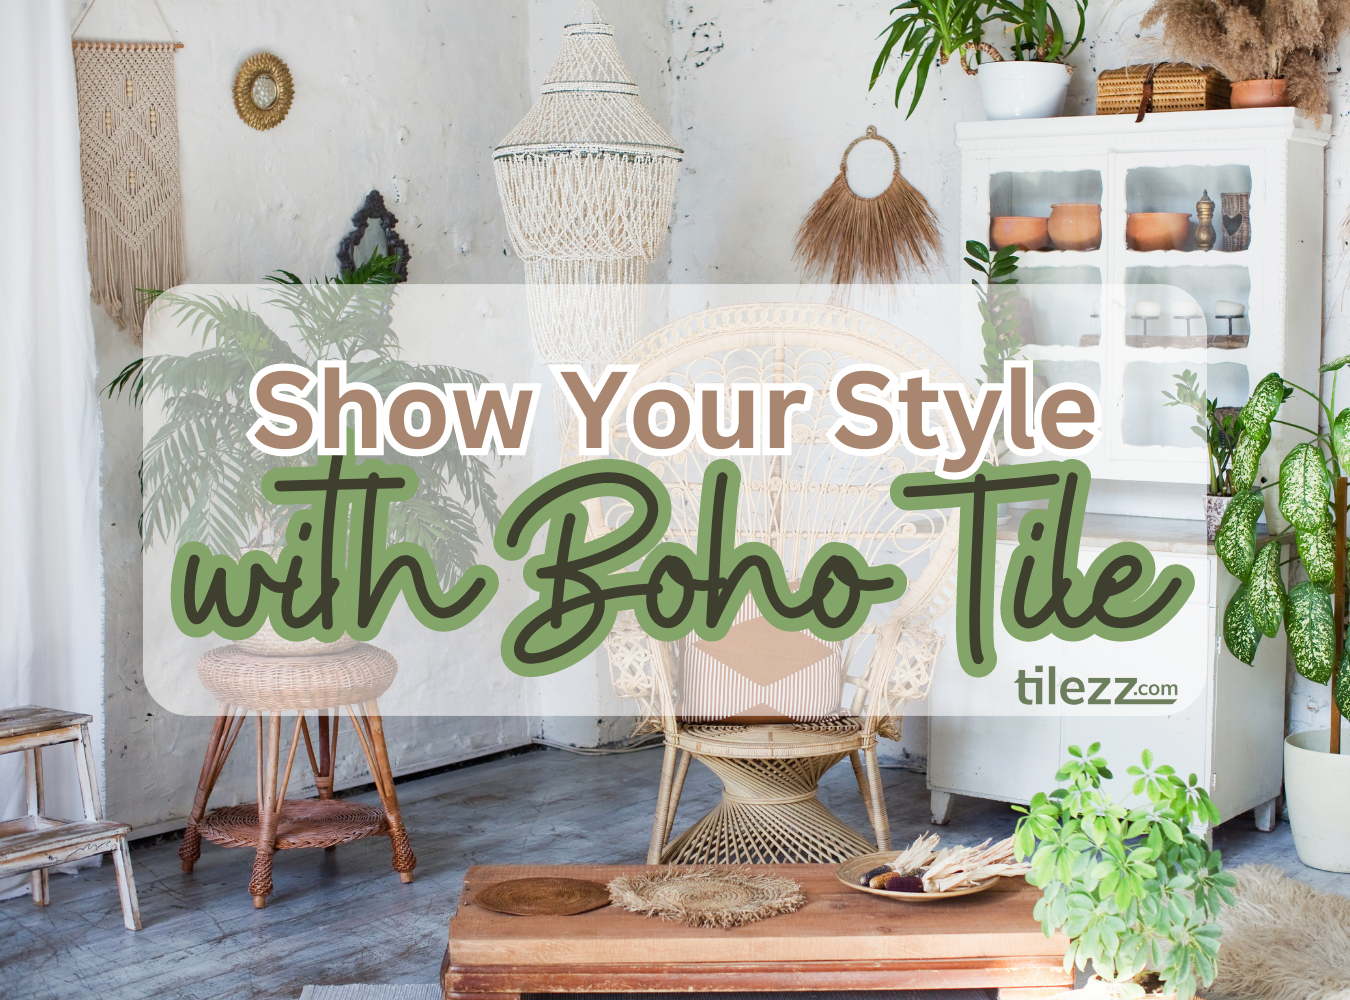 Show Your Style with Boho Tile